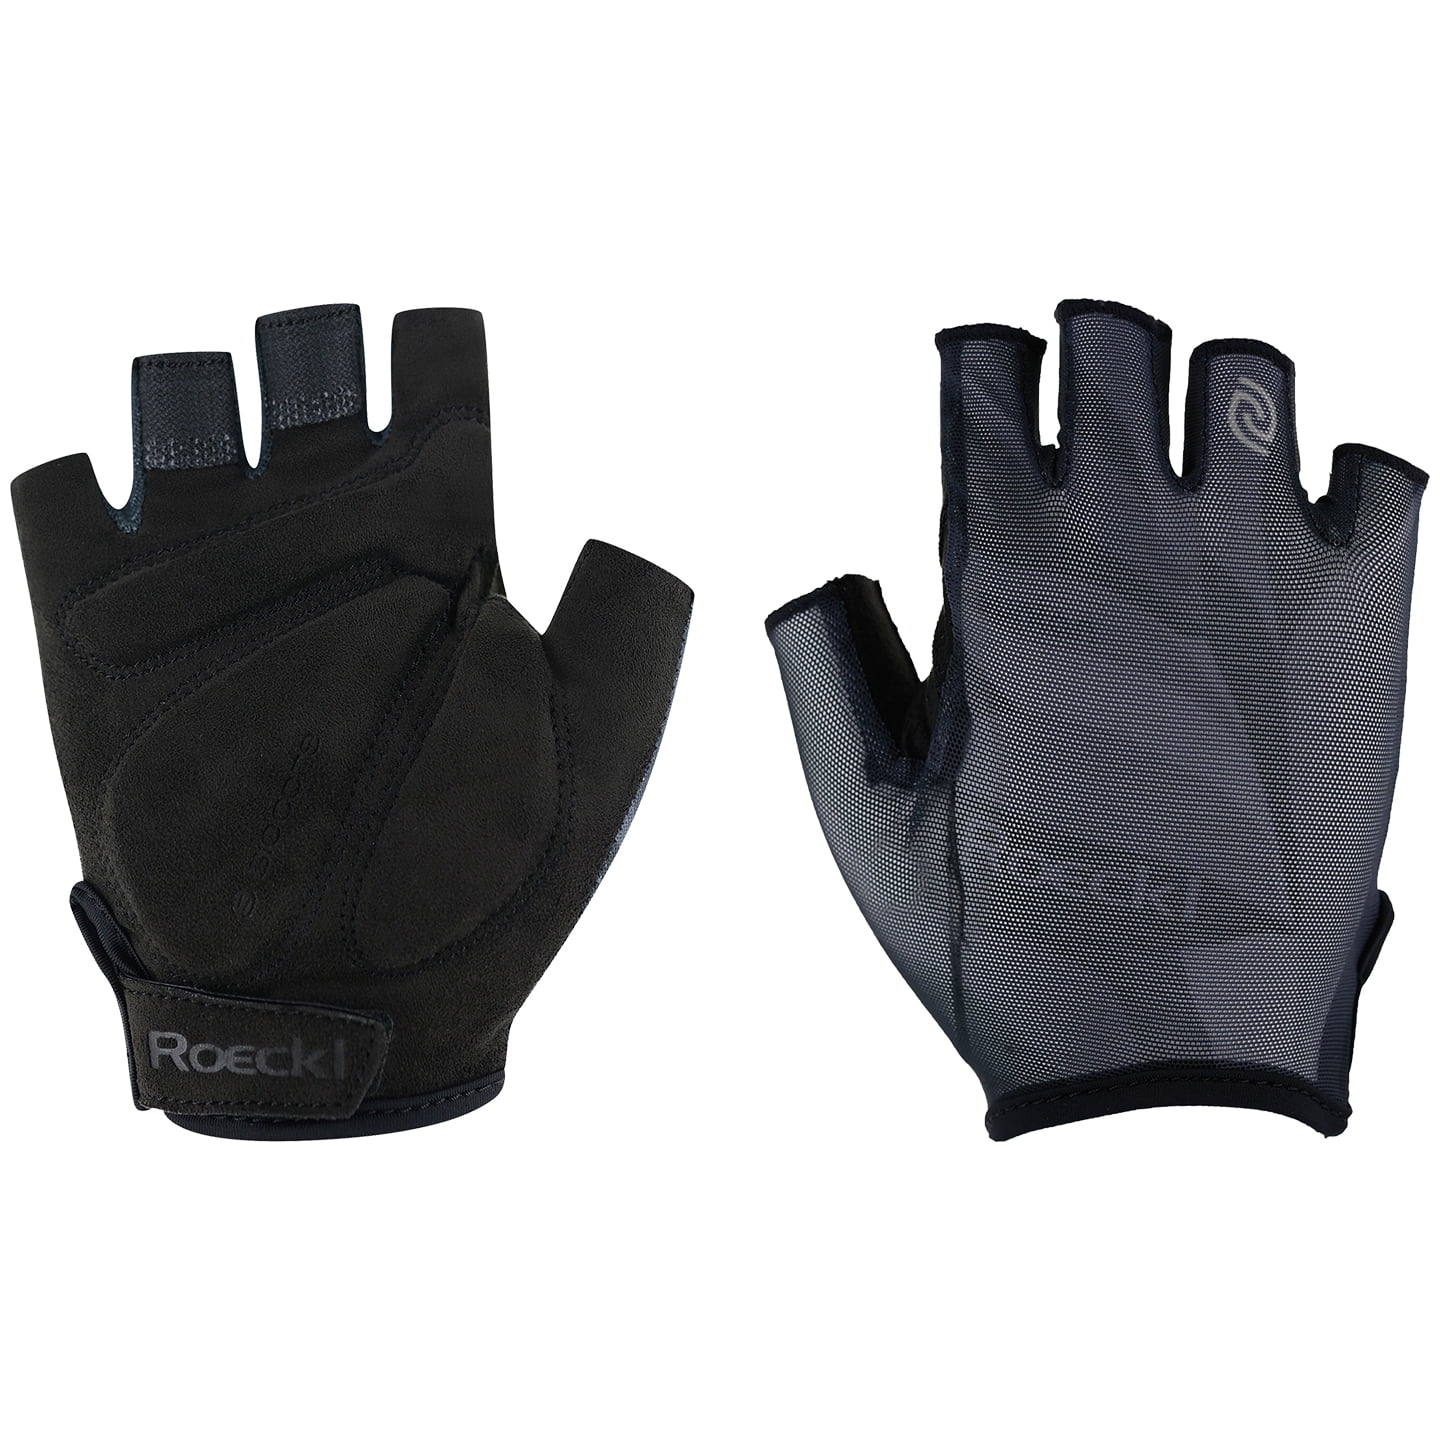 ROECKL Ibio Gloves, for men, size 10, Cycle gloves, Cycle wear